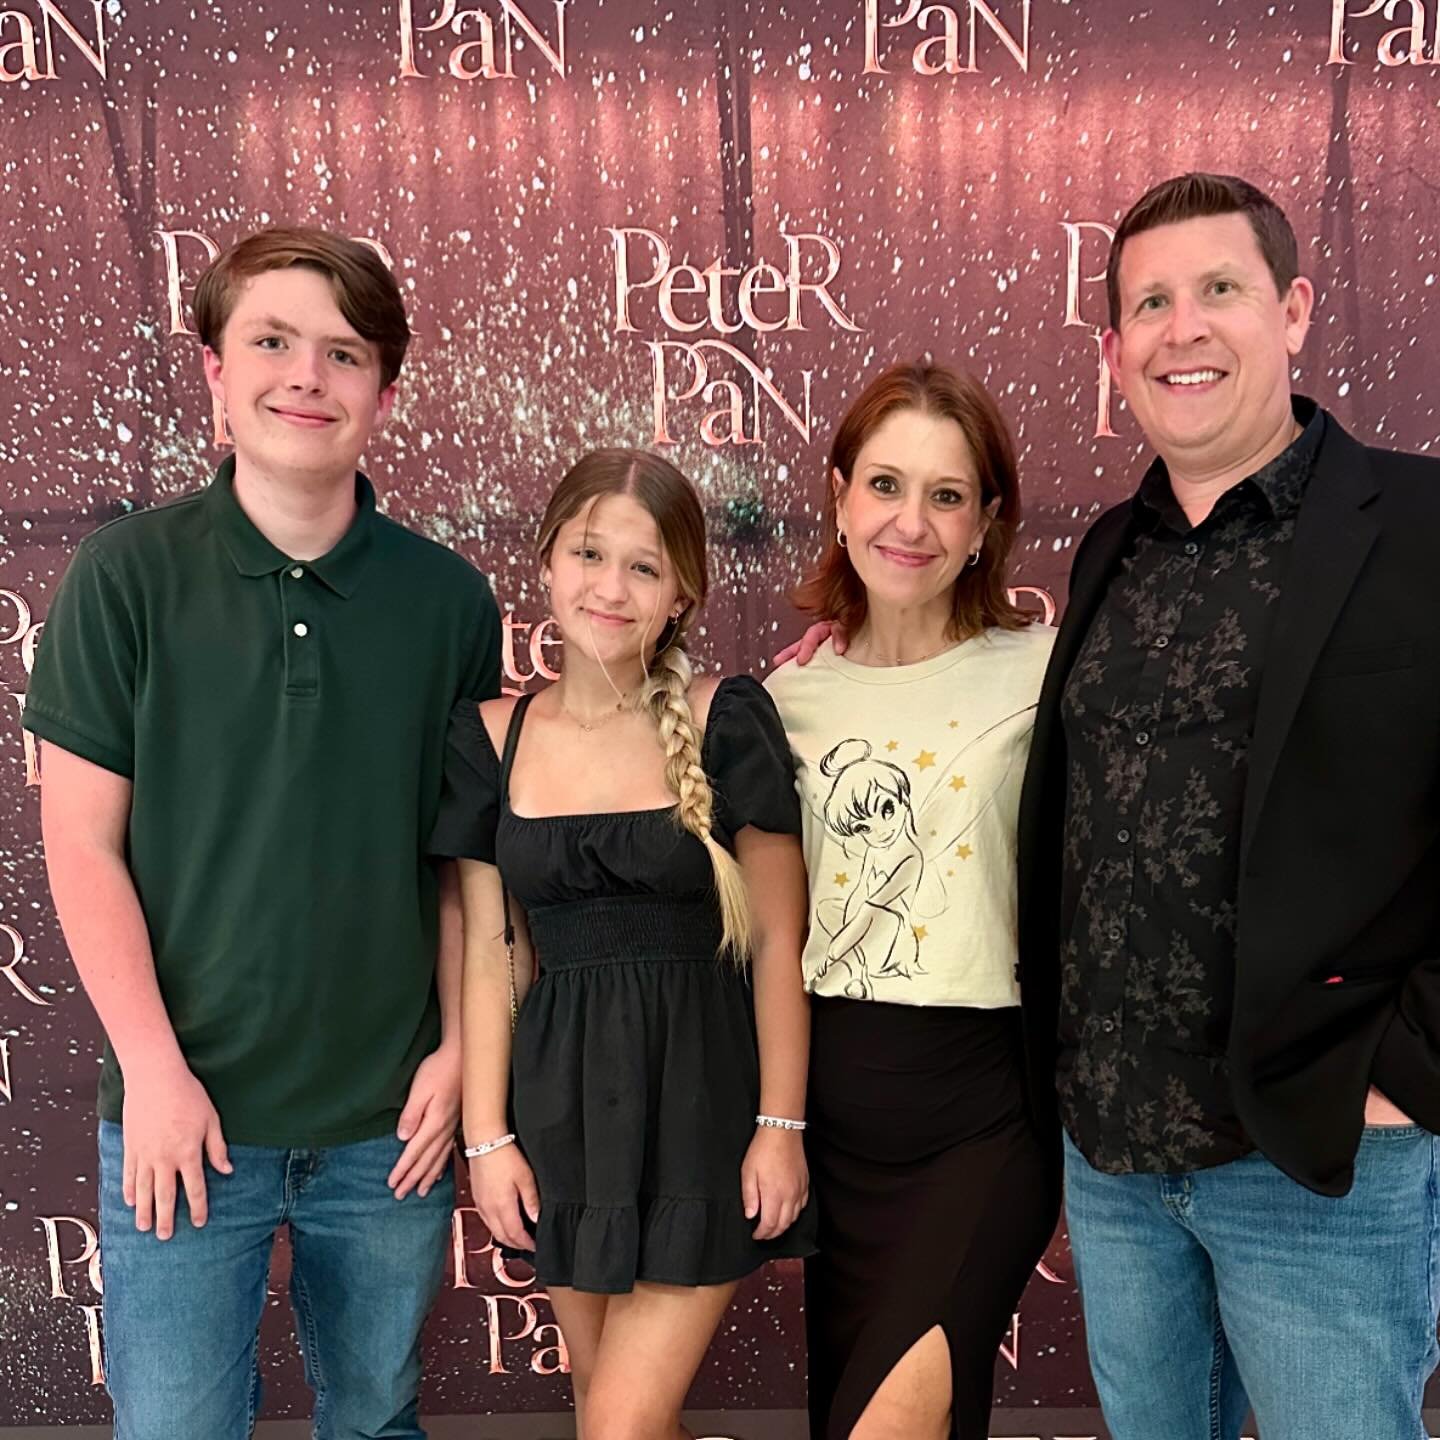 Just think of lovely things and your heart will fly on wings forever in Never Never Land&hellip; 🧚🏼✨

We had a great time seeing @peterpanthemusical at @drphillipsctr last night. 💗